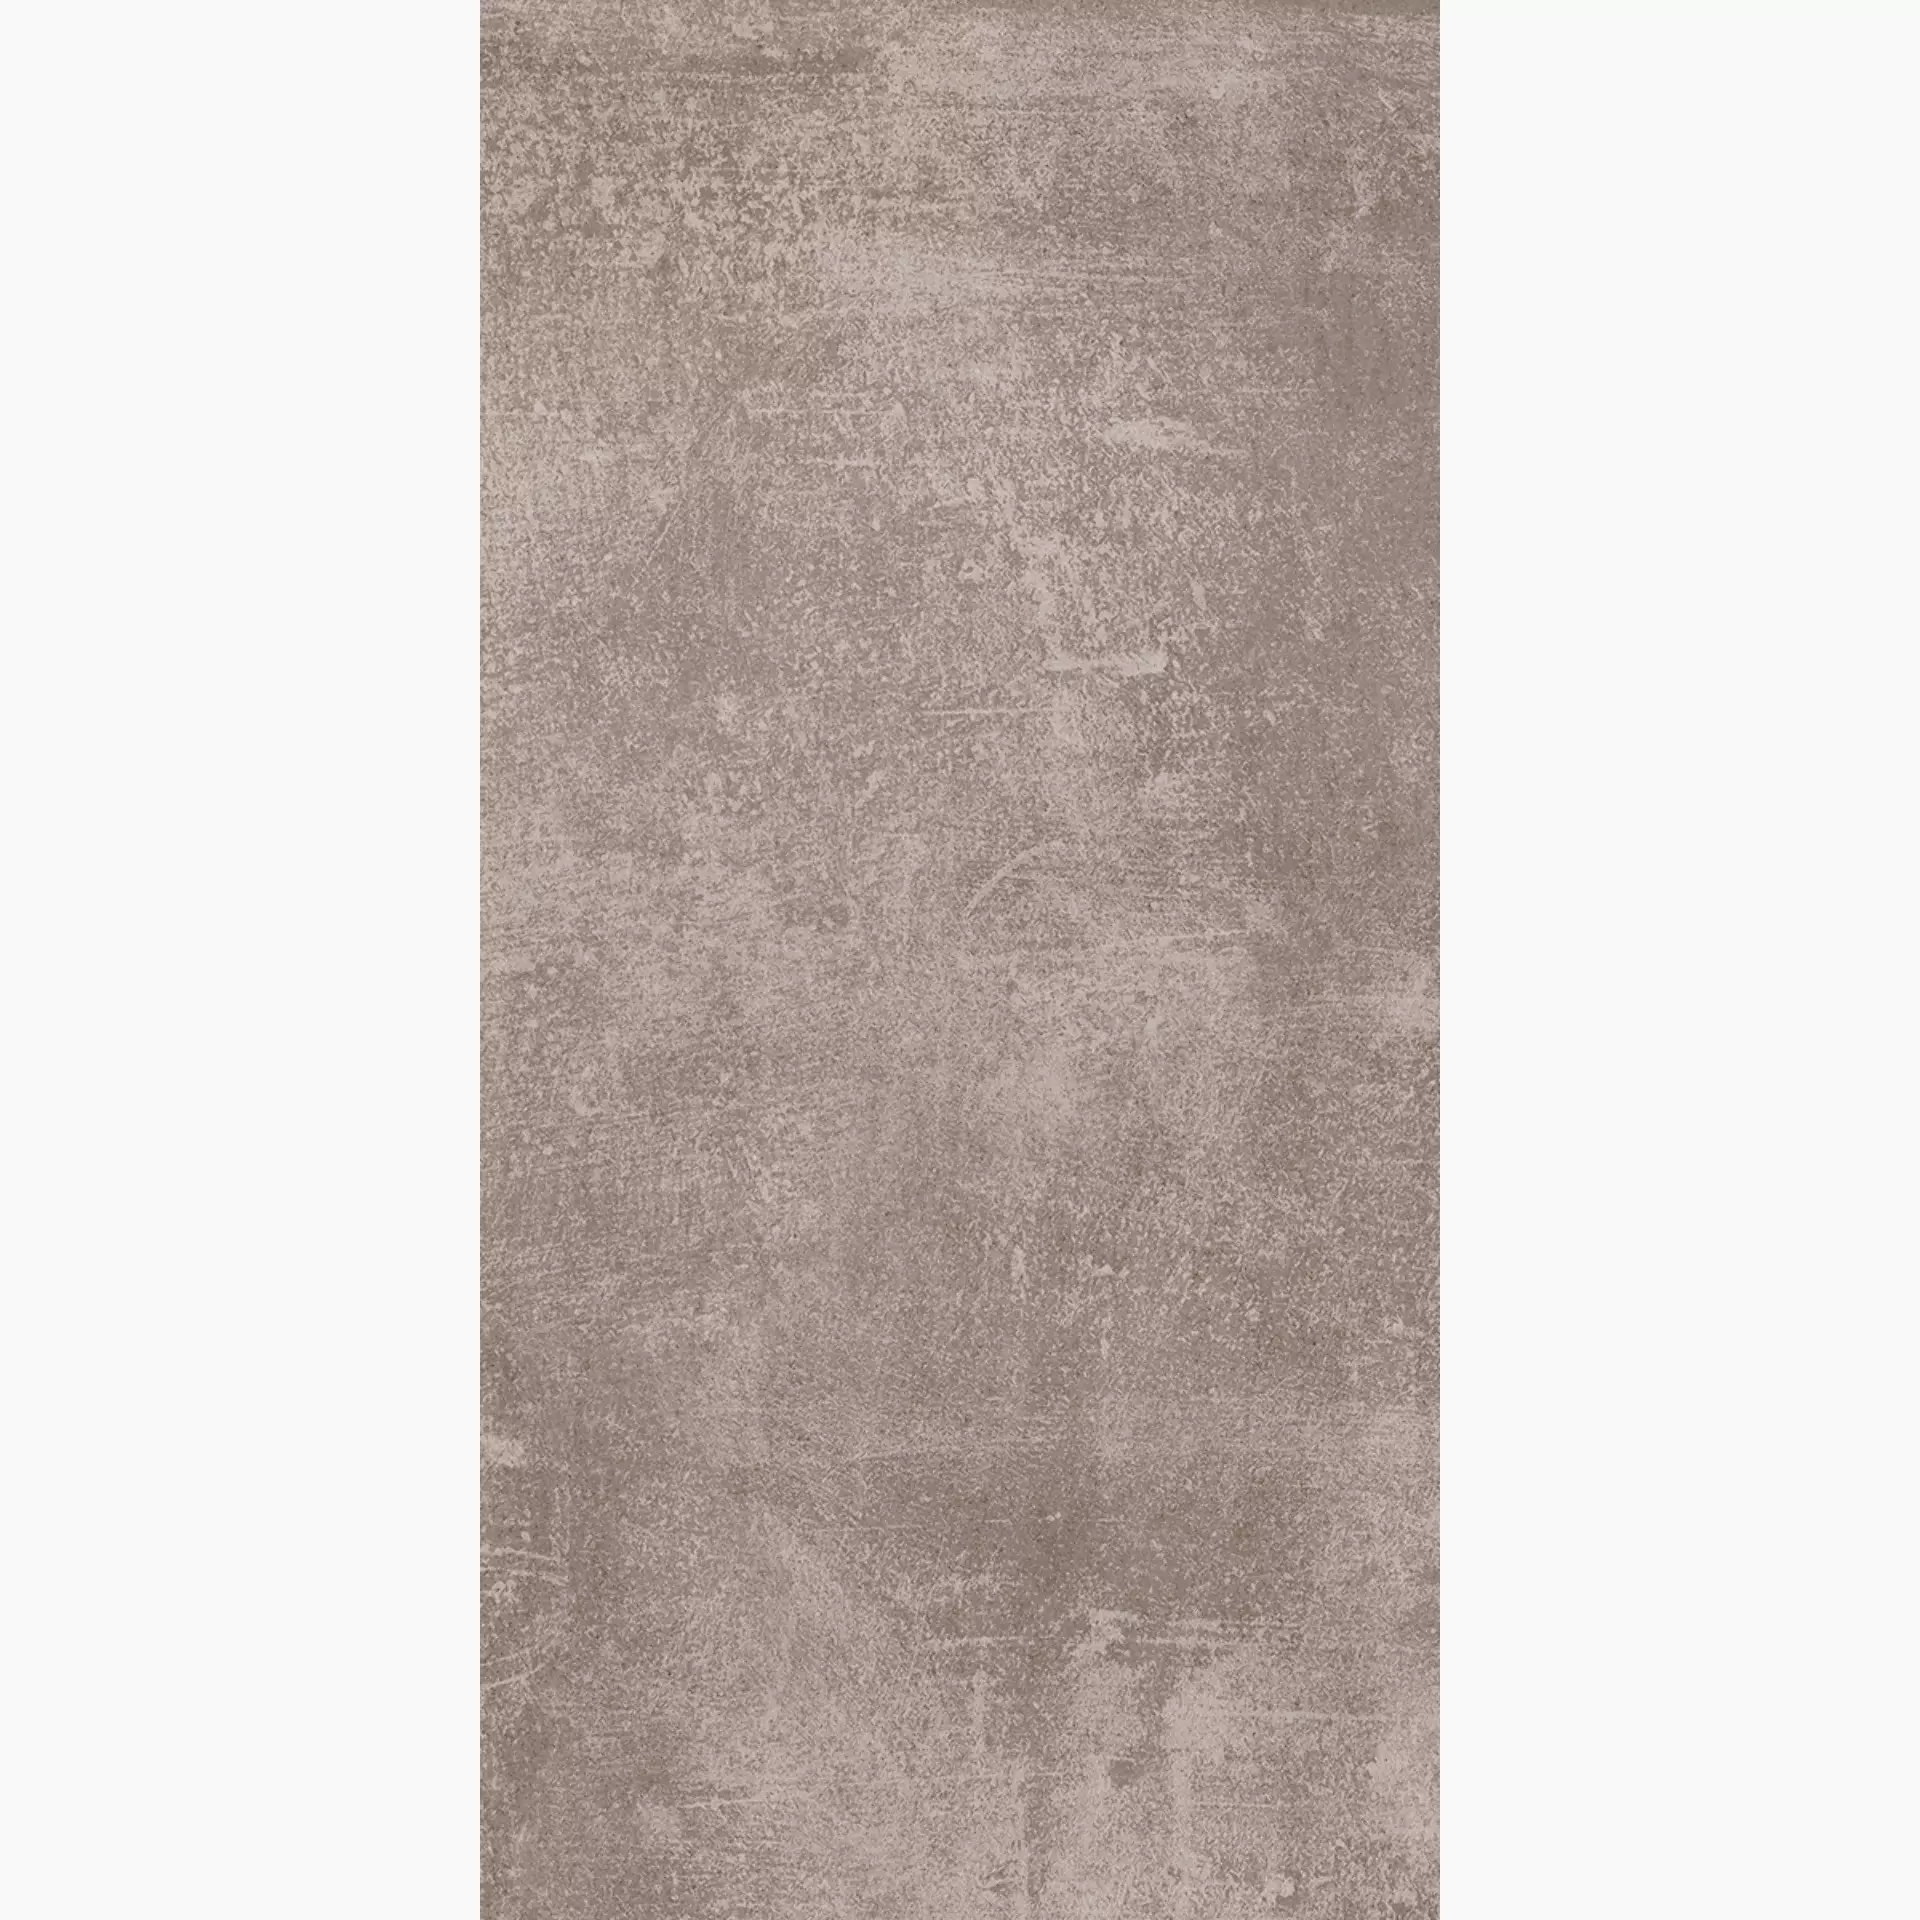 Rondine Volcano Taupe Naturale J87612 60x120cm rectified 8,5mm